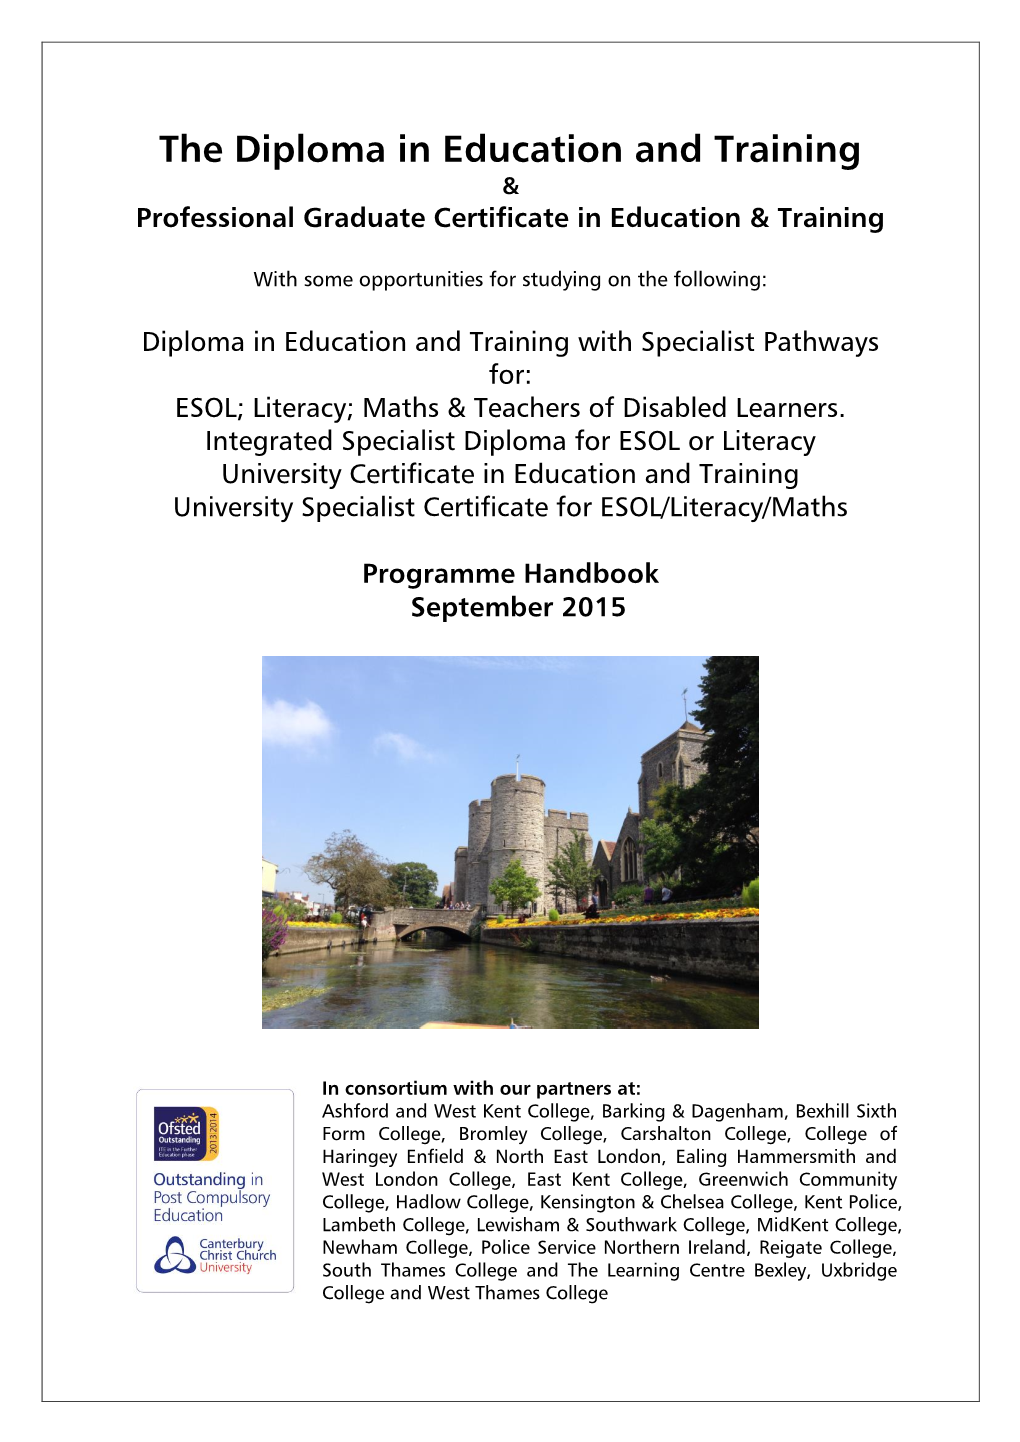 The Diploma in Education and Training & Professional Graduate Certificate in Education & Training